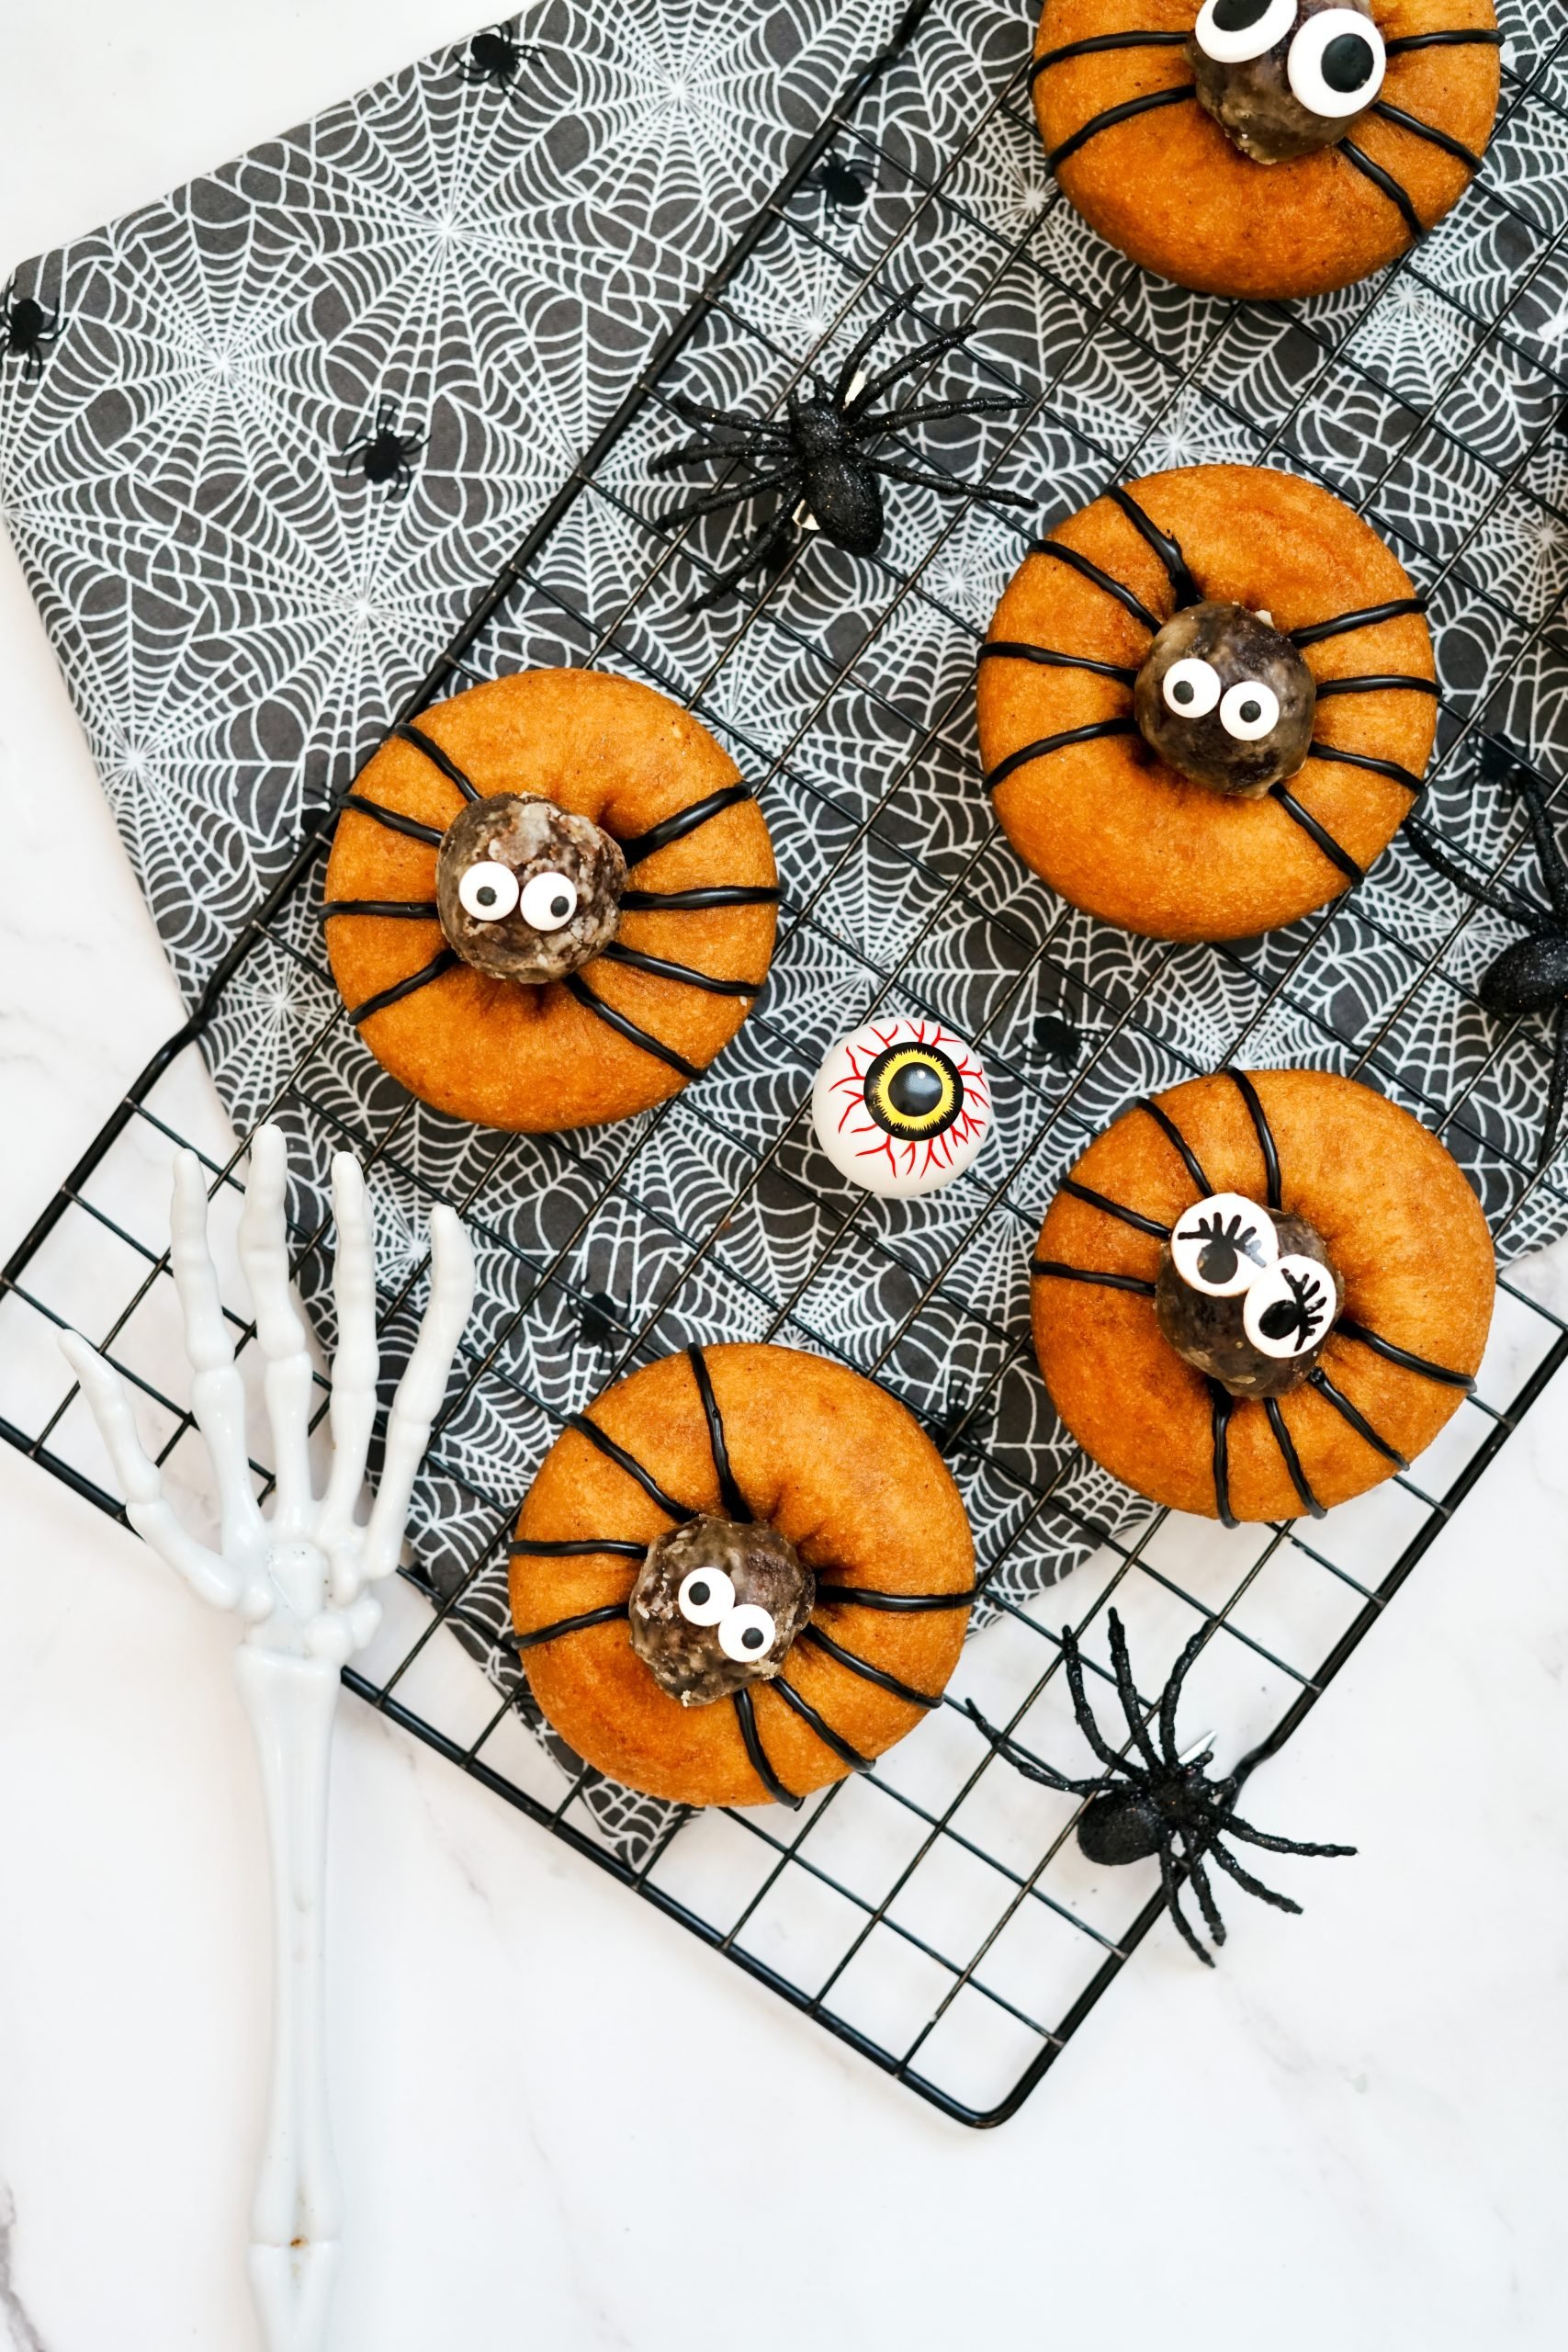 fun halloween desserts on tray with spiders and skeleton hand and eyeballs